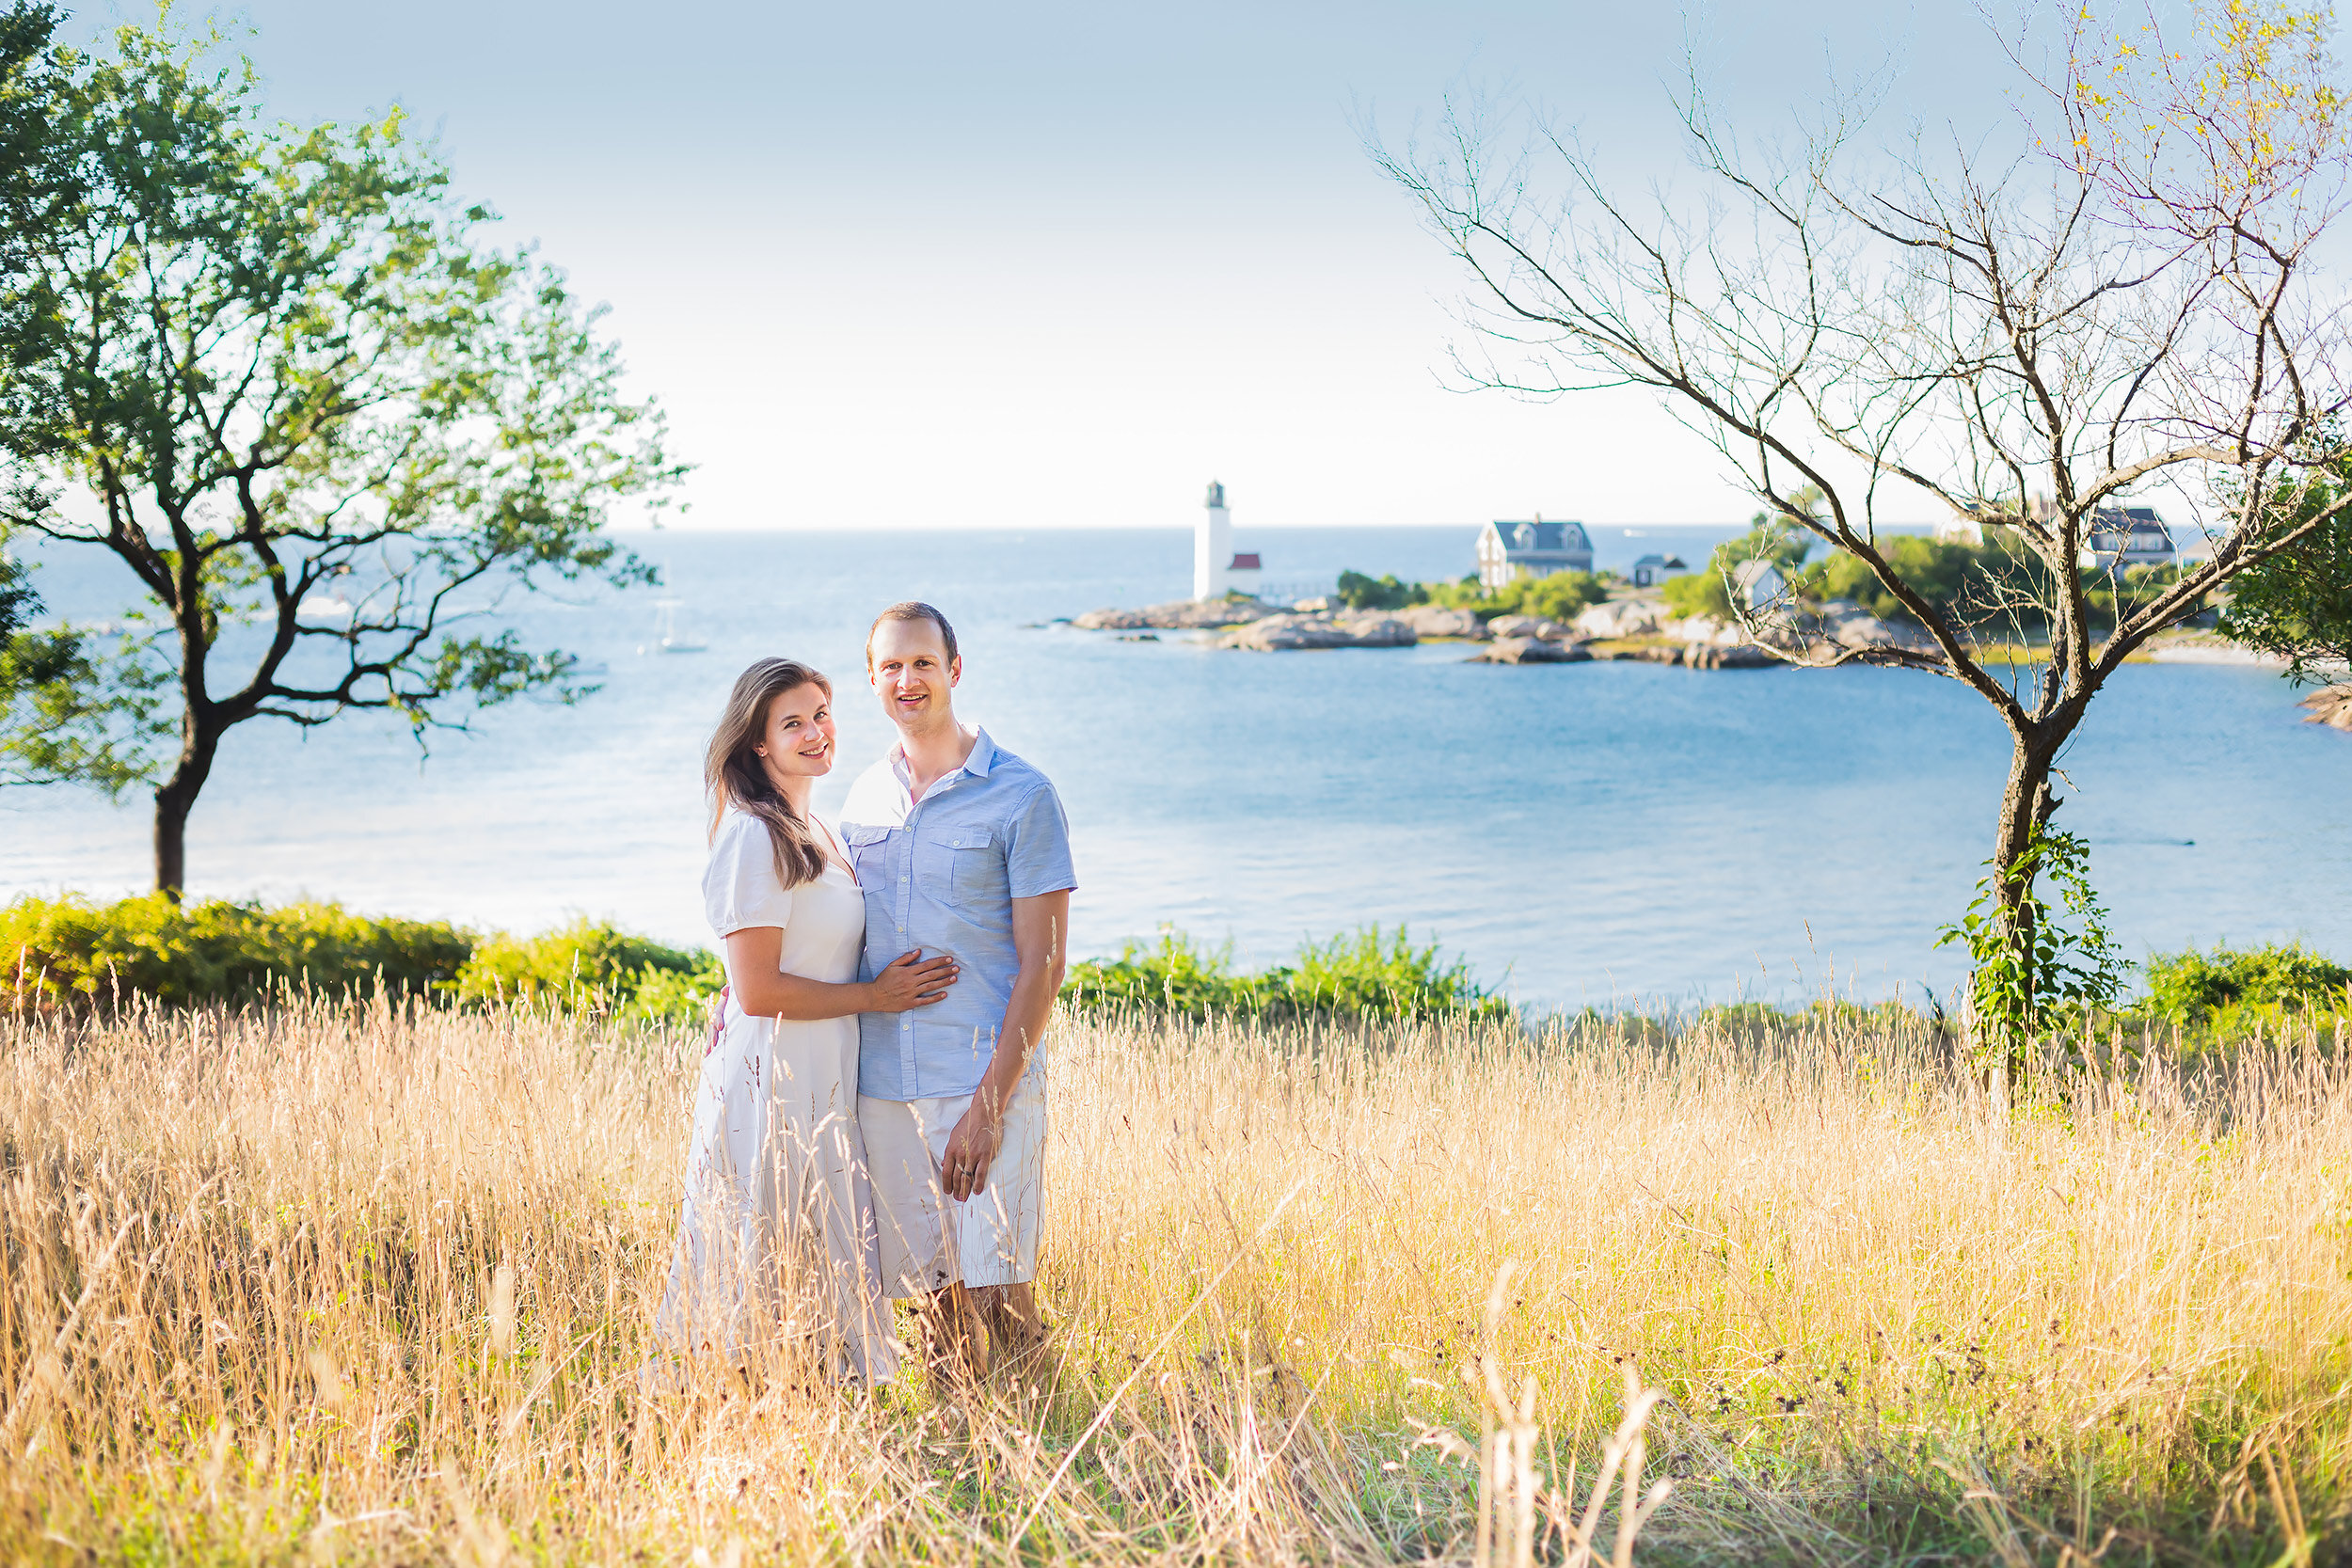 Marblehead Family Portrait | Stephen Grant Photography